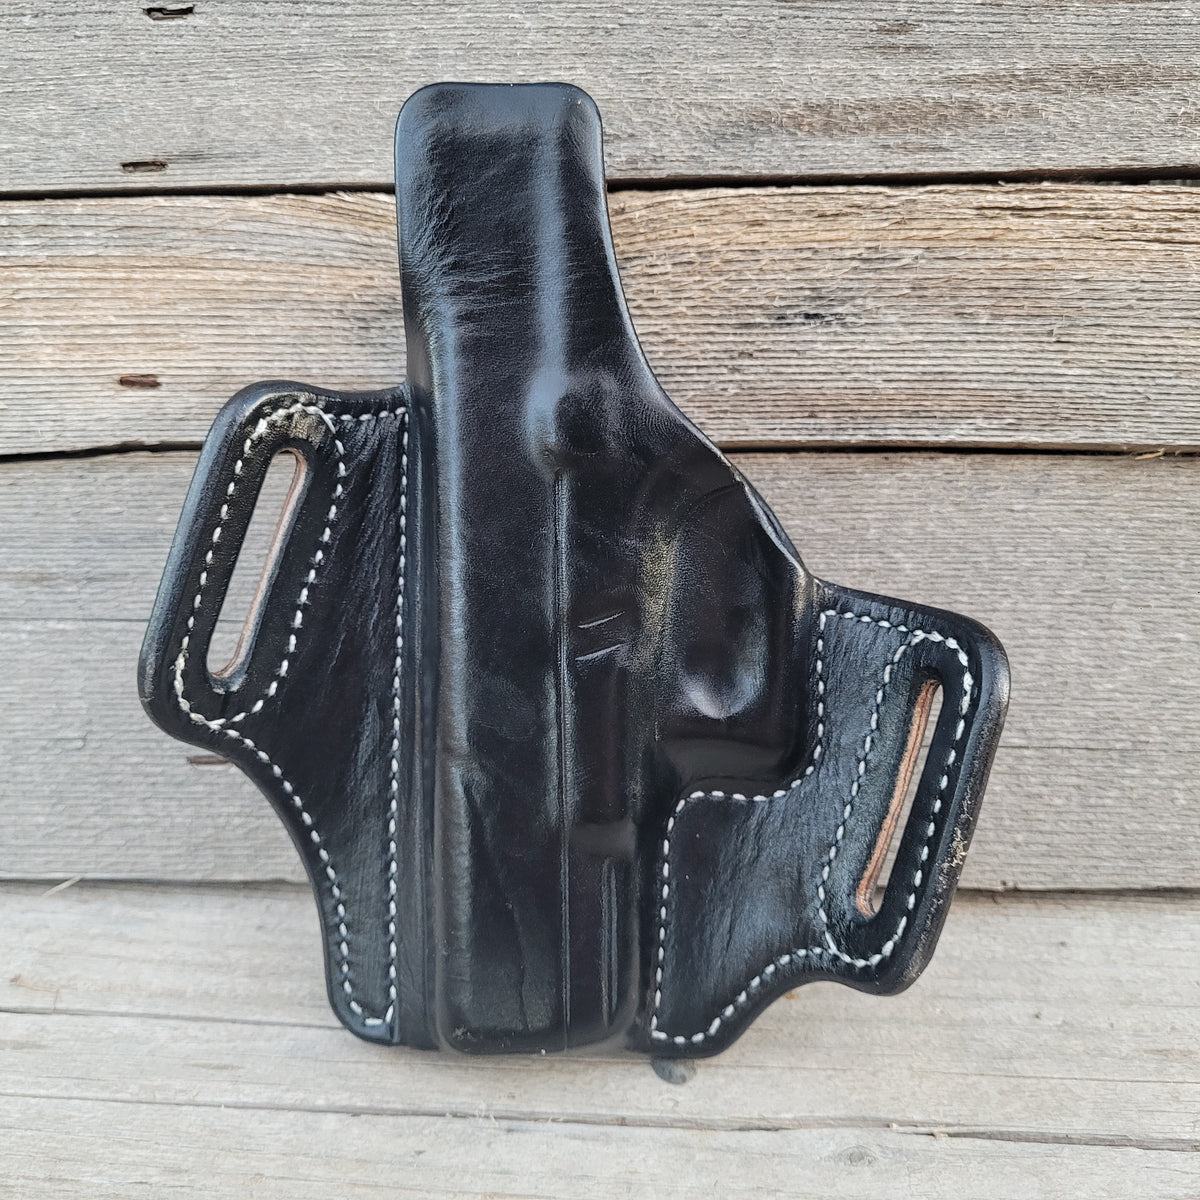 Glock 19/23 Classic Holster All Black White Stitching and Partial Hex stamp